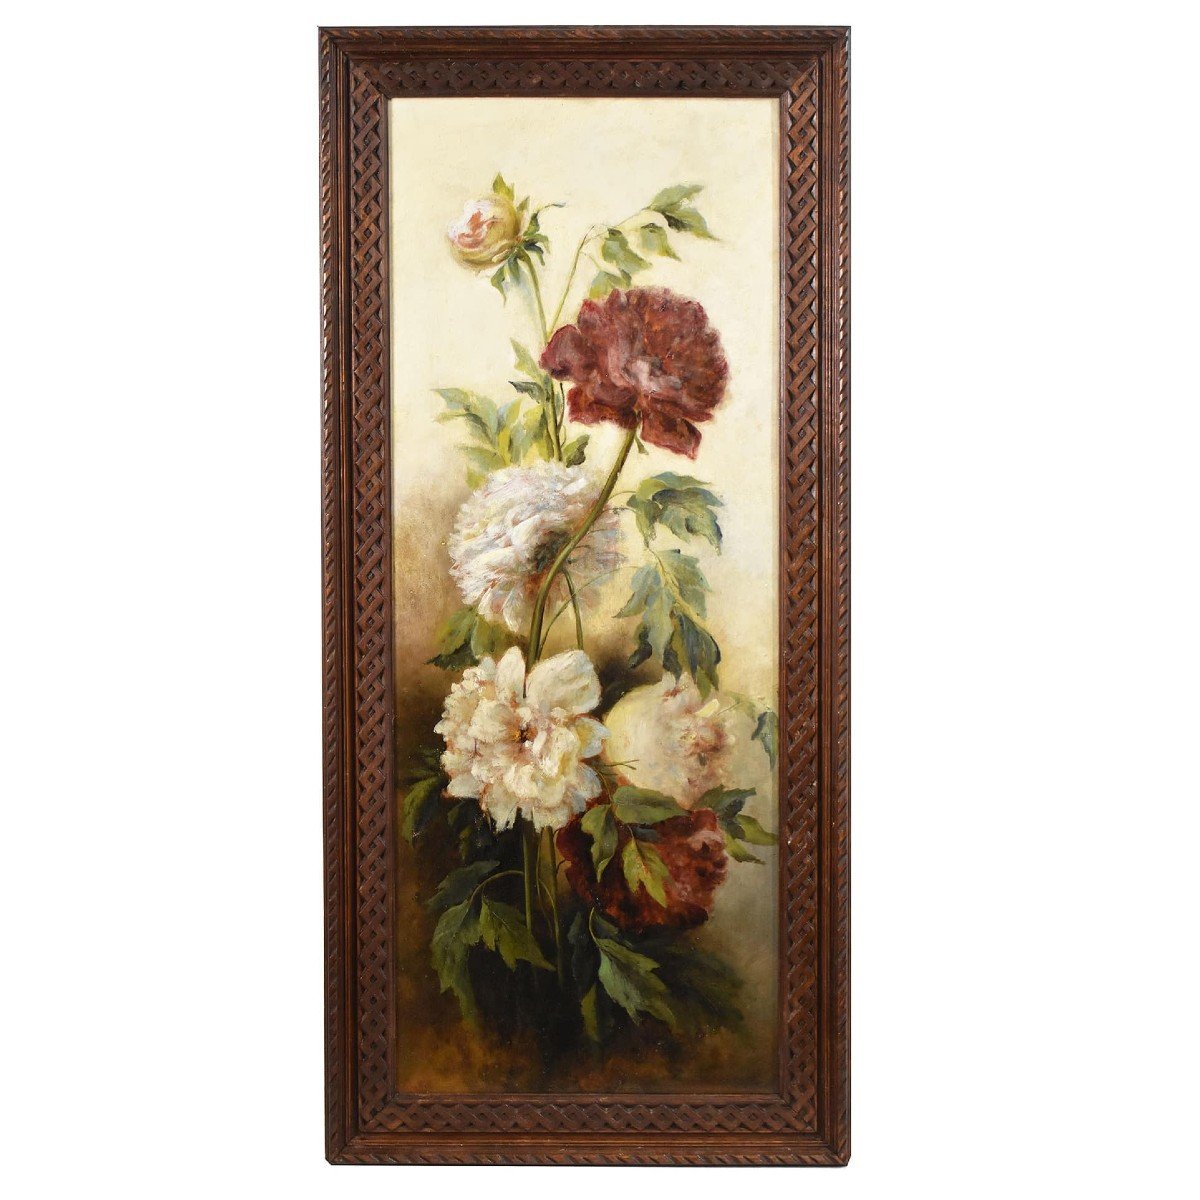 Antique Still Life Painting, Flowers Vase Painting, Flowers Of Peonies, Oil On Wood.  (qf456)